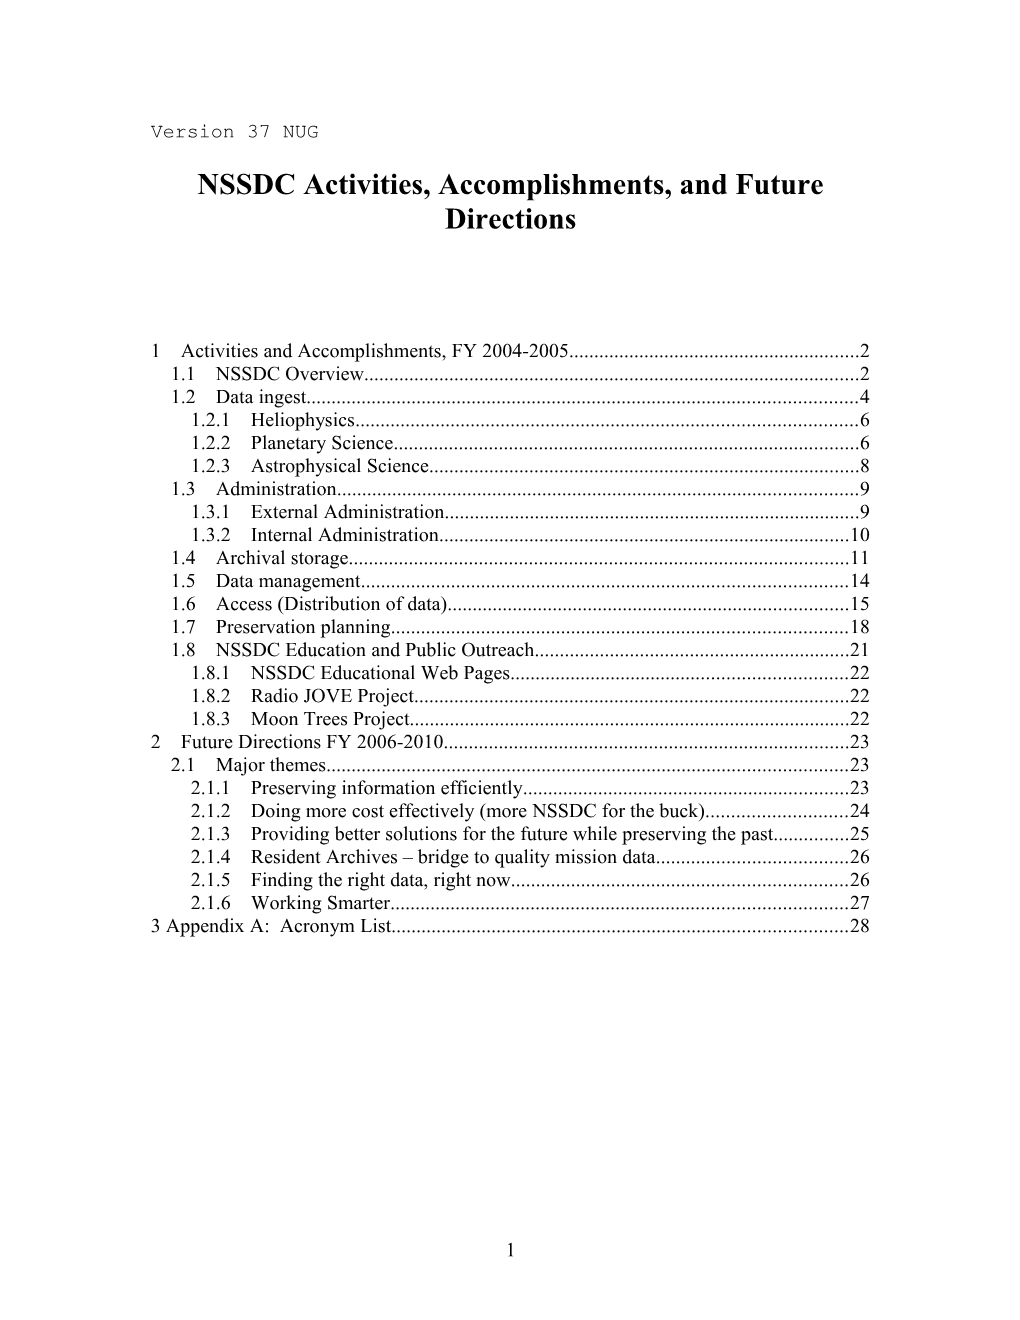 NSSDC Activities, Accomplishments, and Future Directions